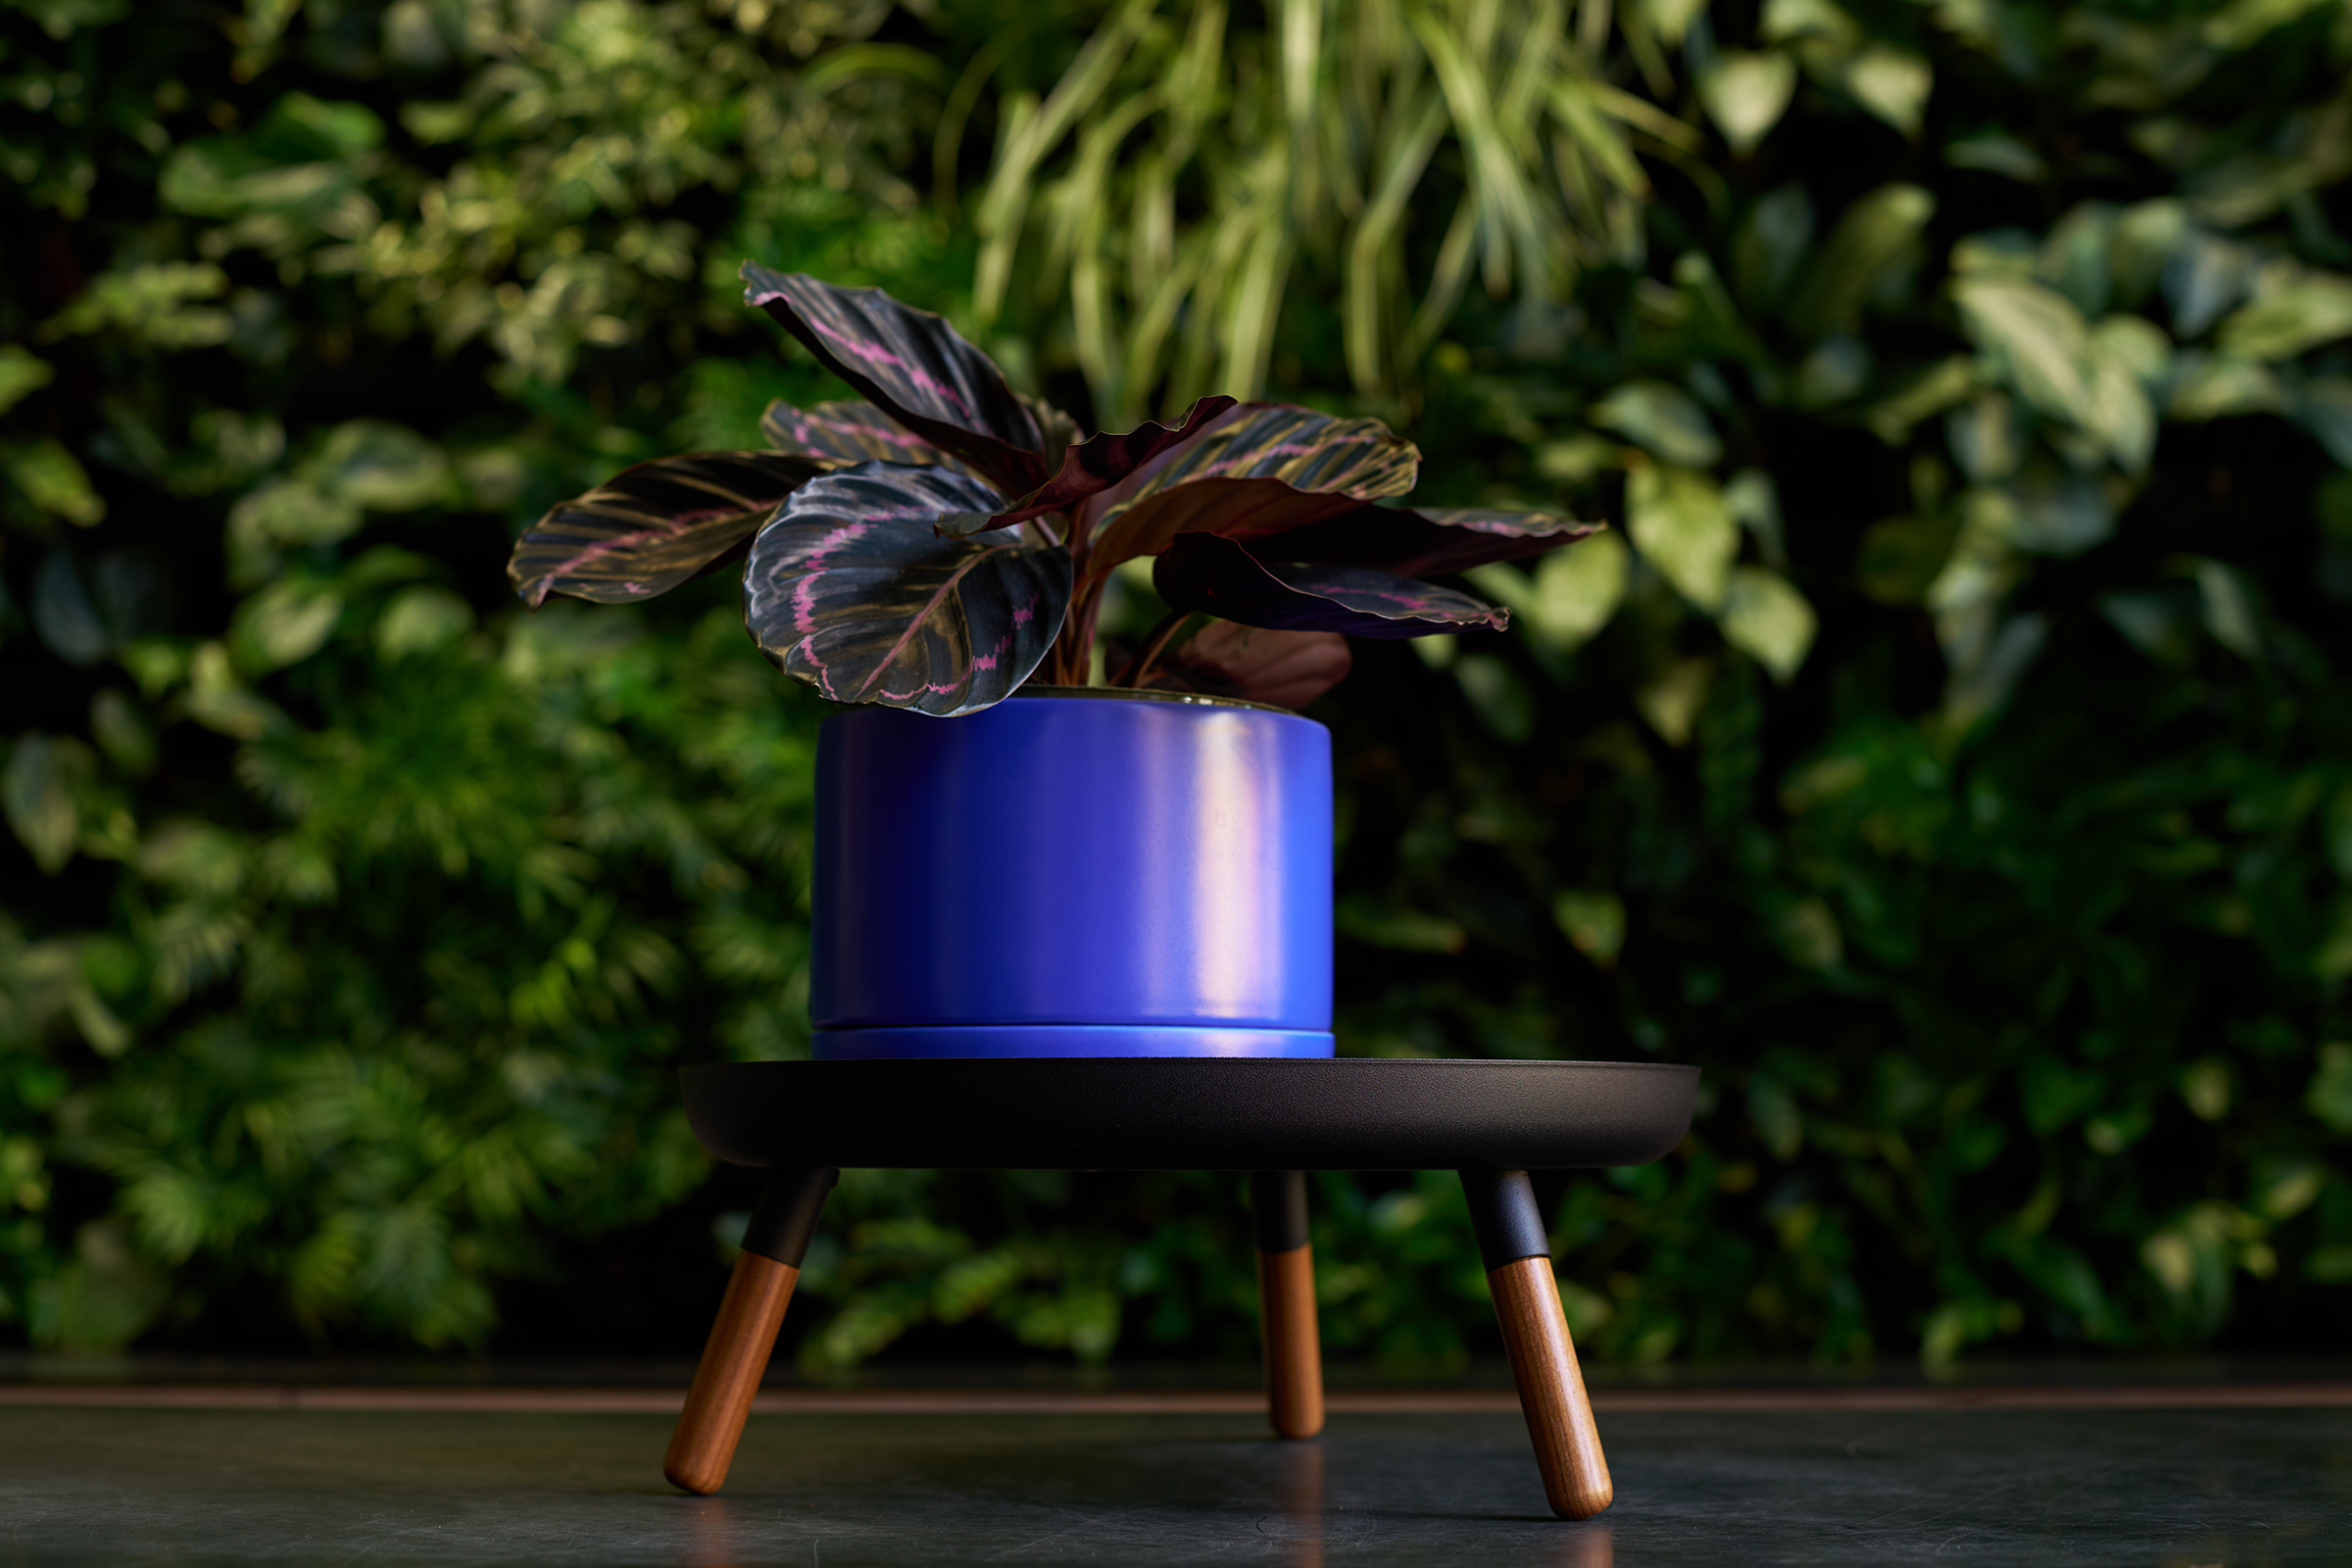 Greenery Unlimited's Franklin 17 Self Watering Planter in Cobalt with a plant inside, sitting atop Yamazaki Home's Countertop Pedestal Tray by Yamazaki Home in black.